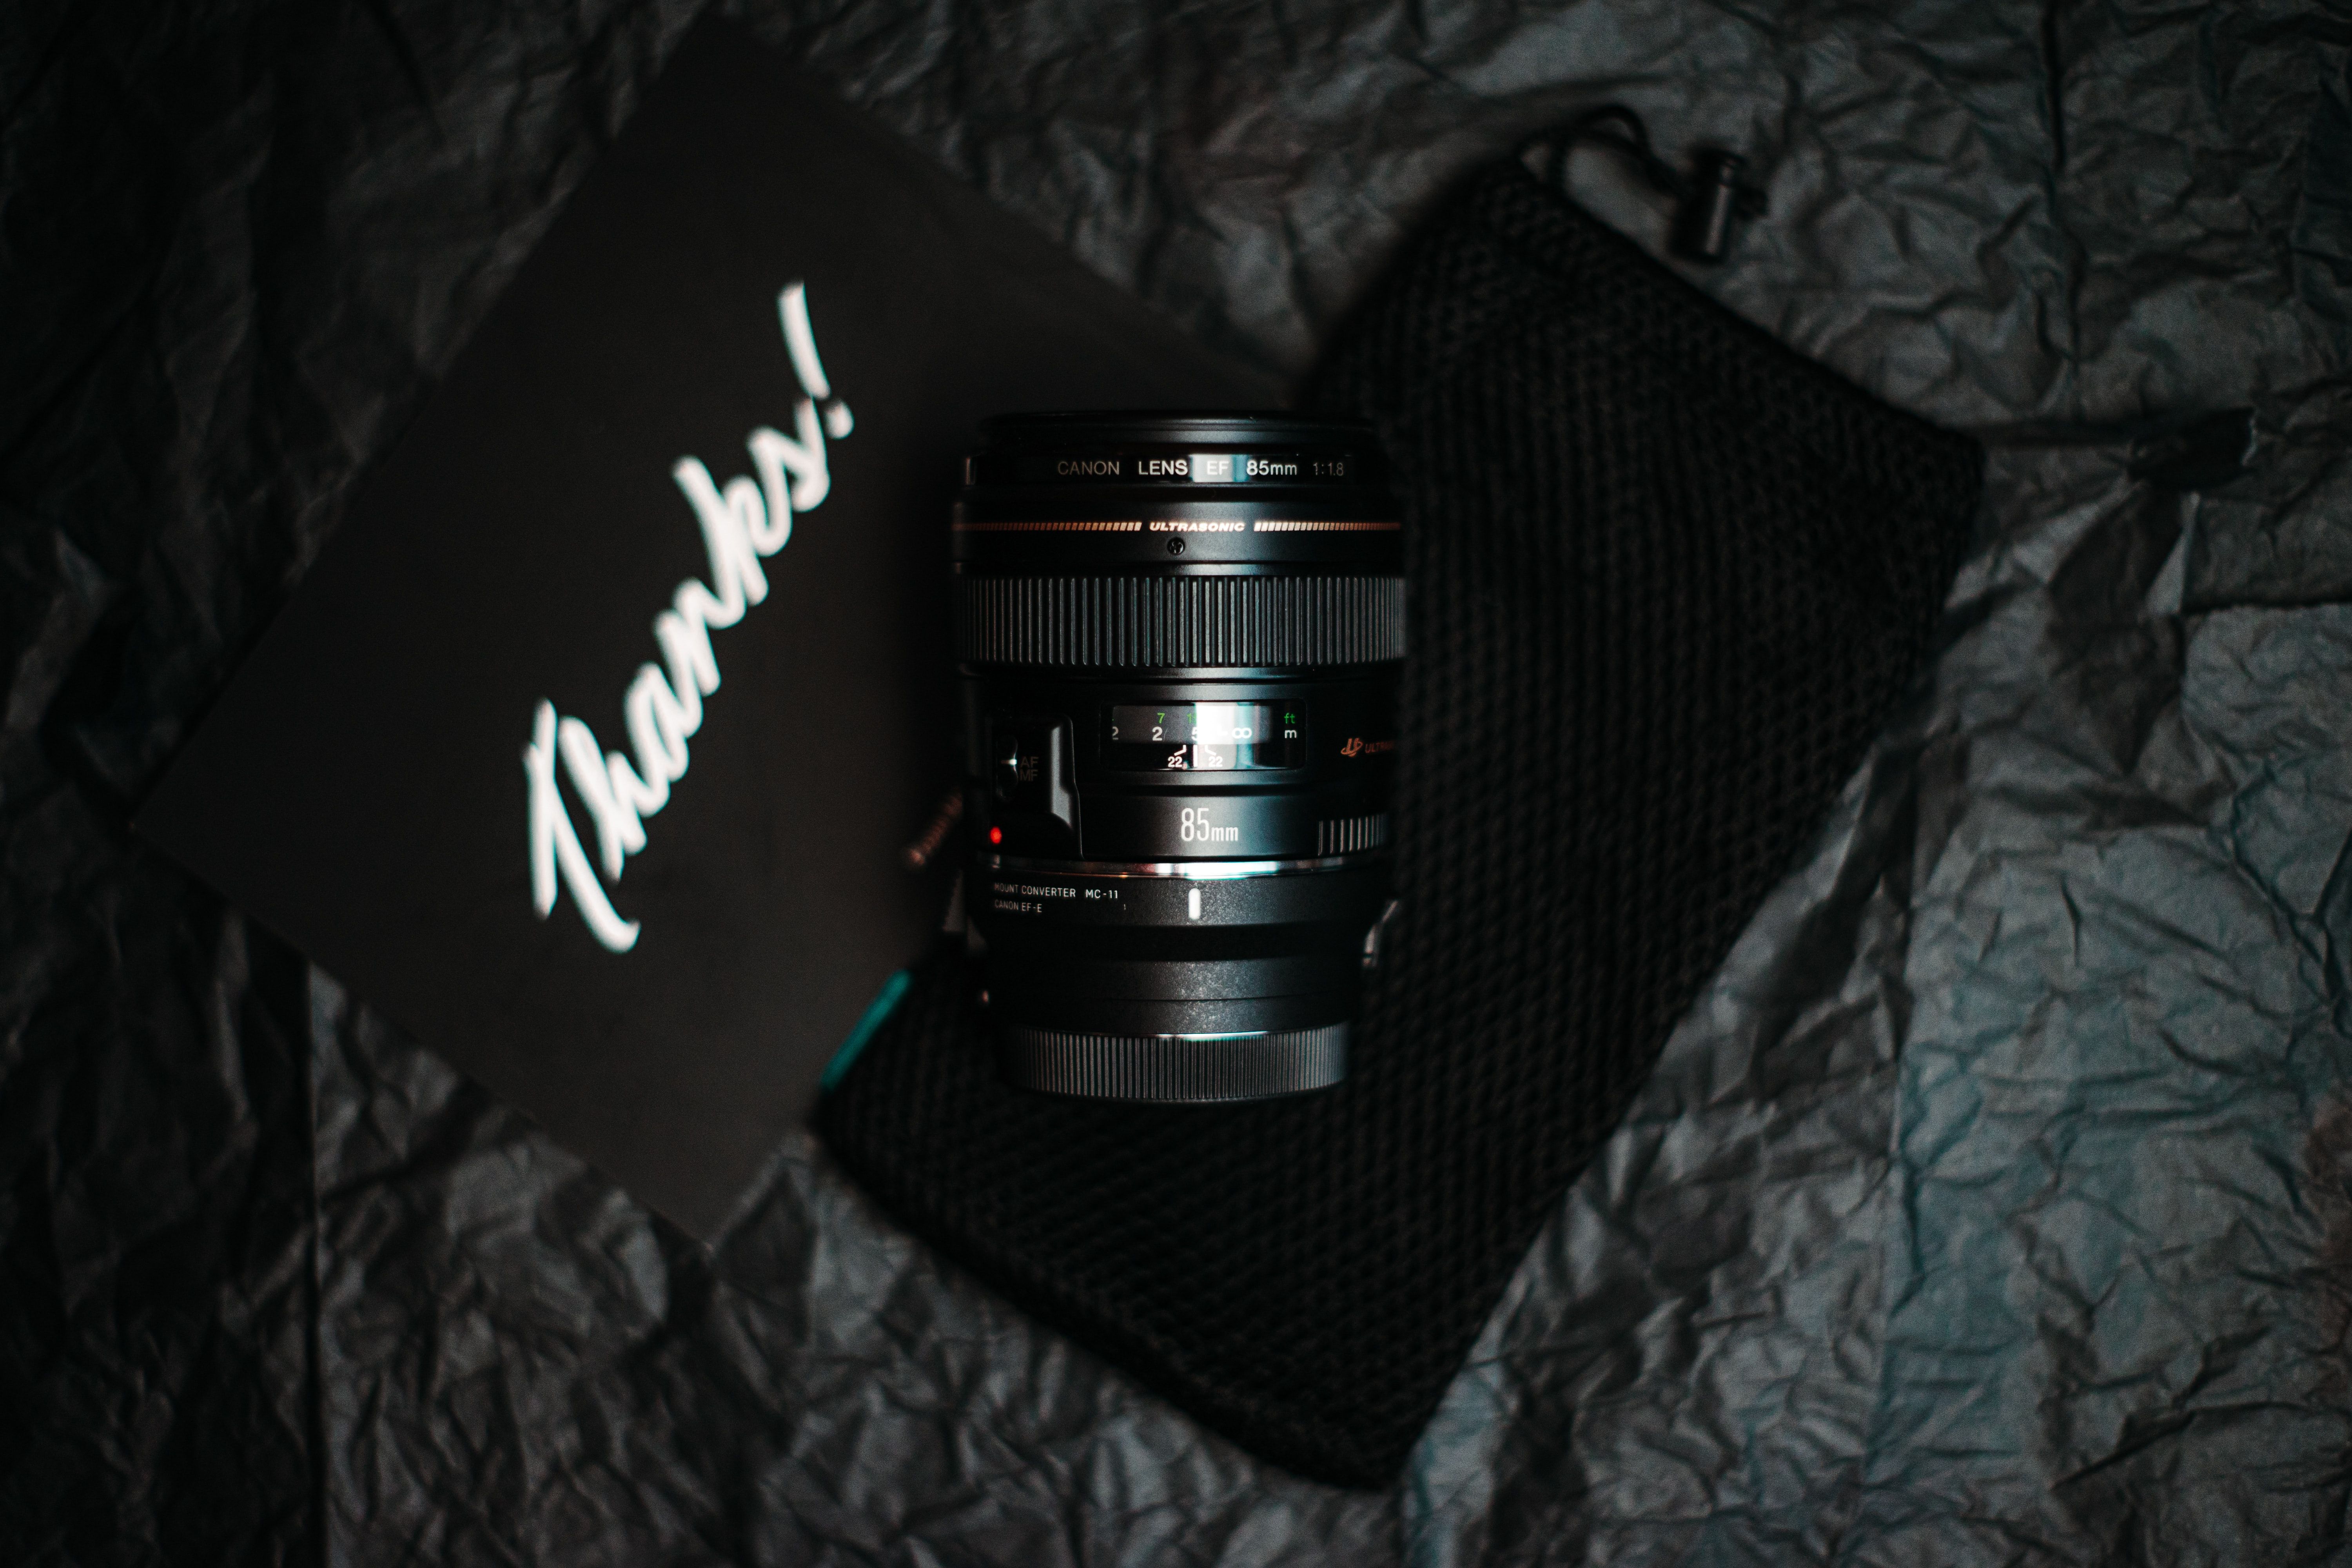 Photo of a camera lens on a black background